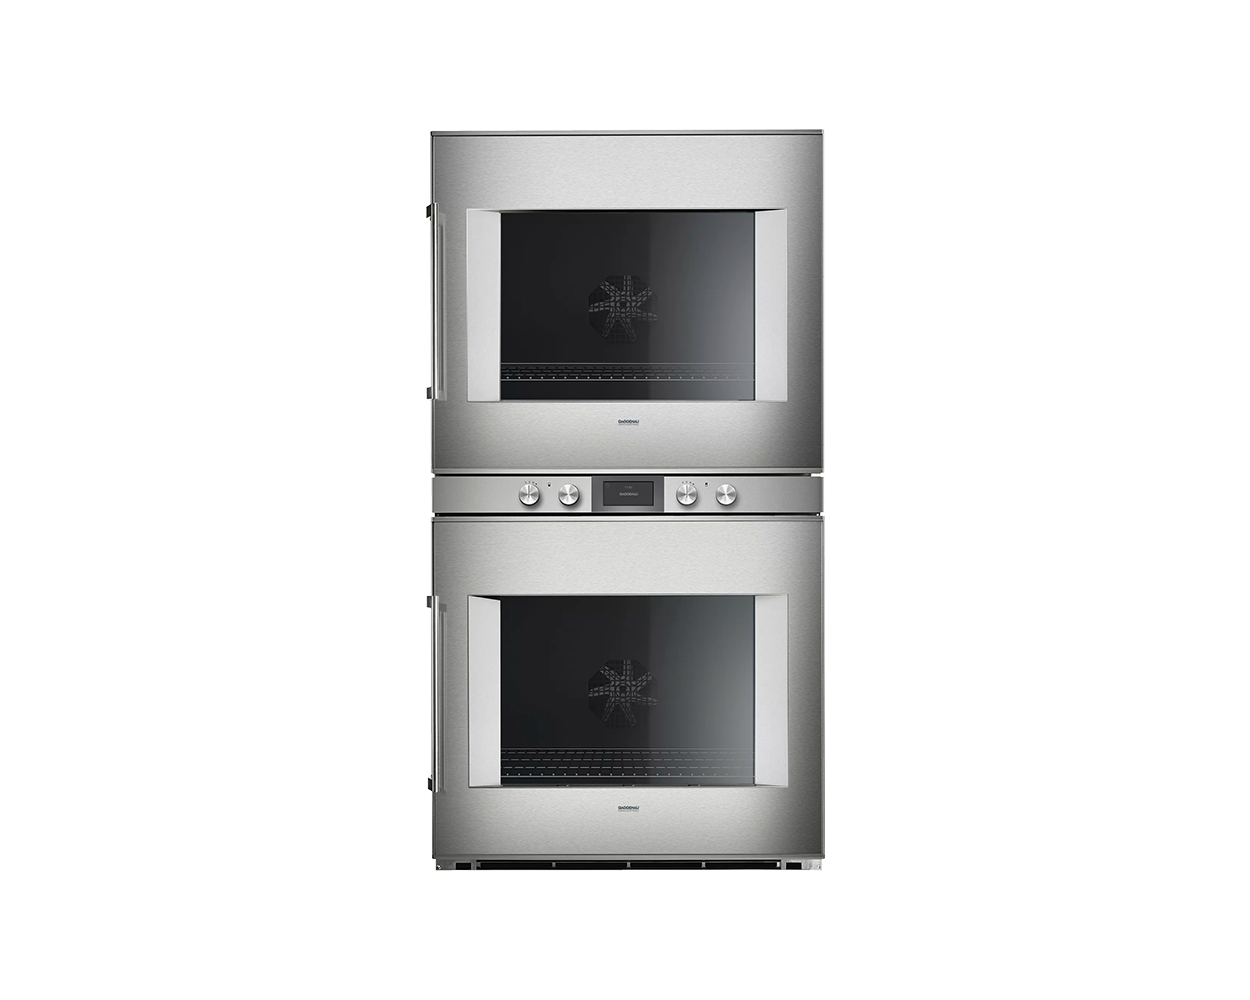 Luxury kitchen appliance brand Gaggenau 400 series double oven. Buy in the UK with Krieder.